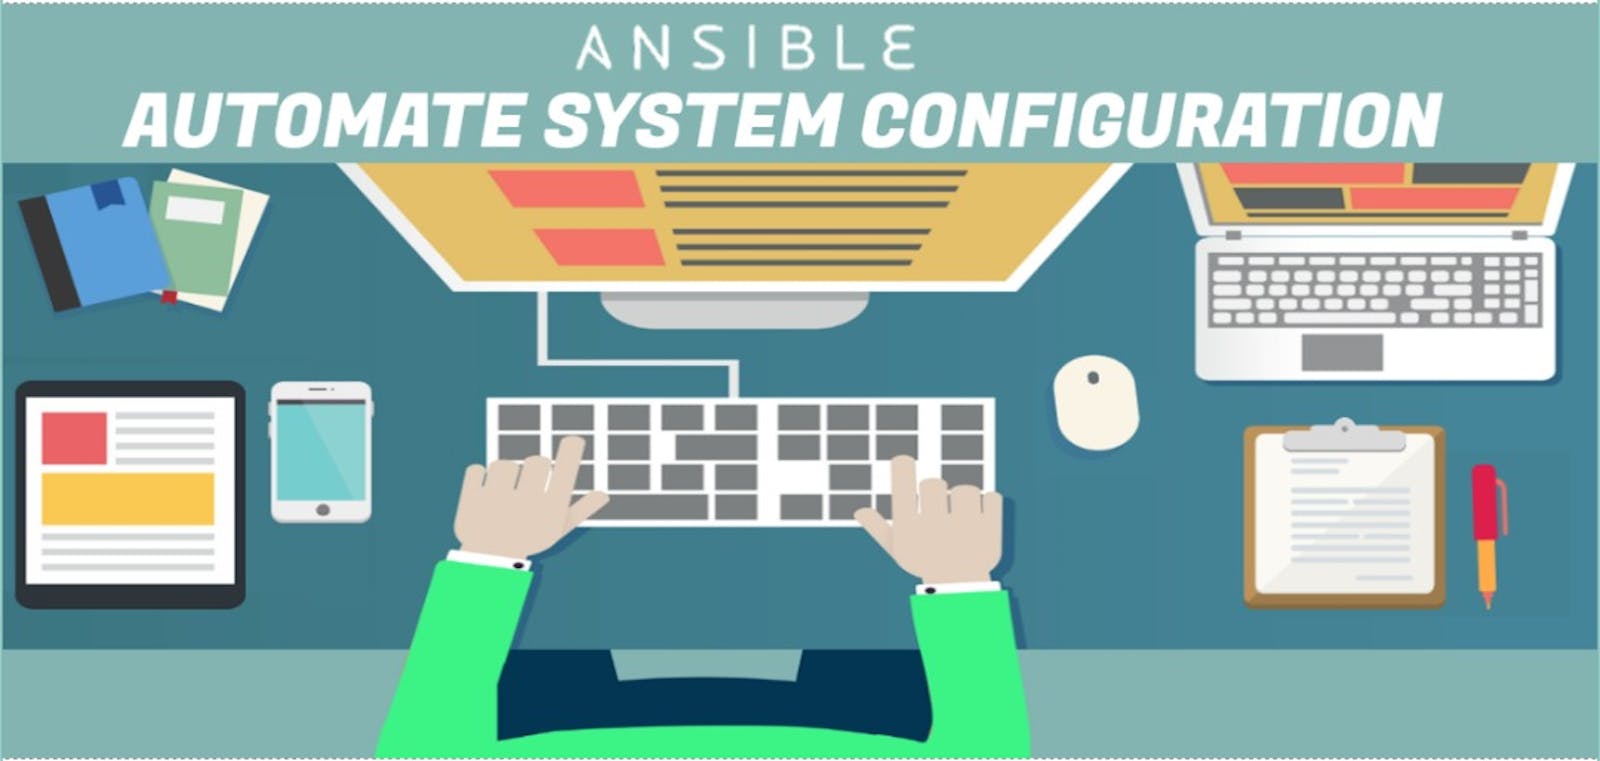 Securing a Linux server with Ansible